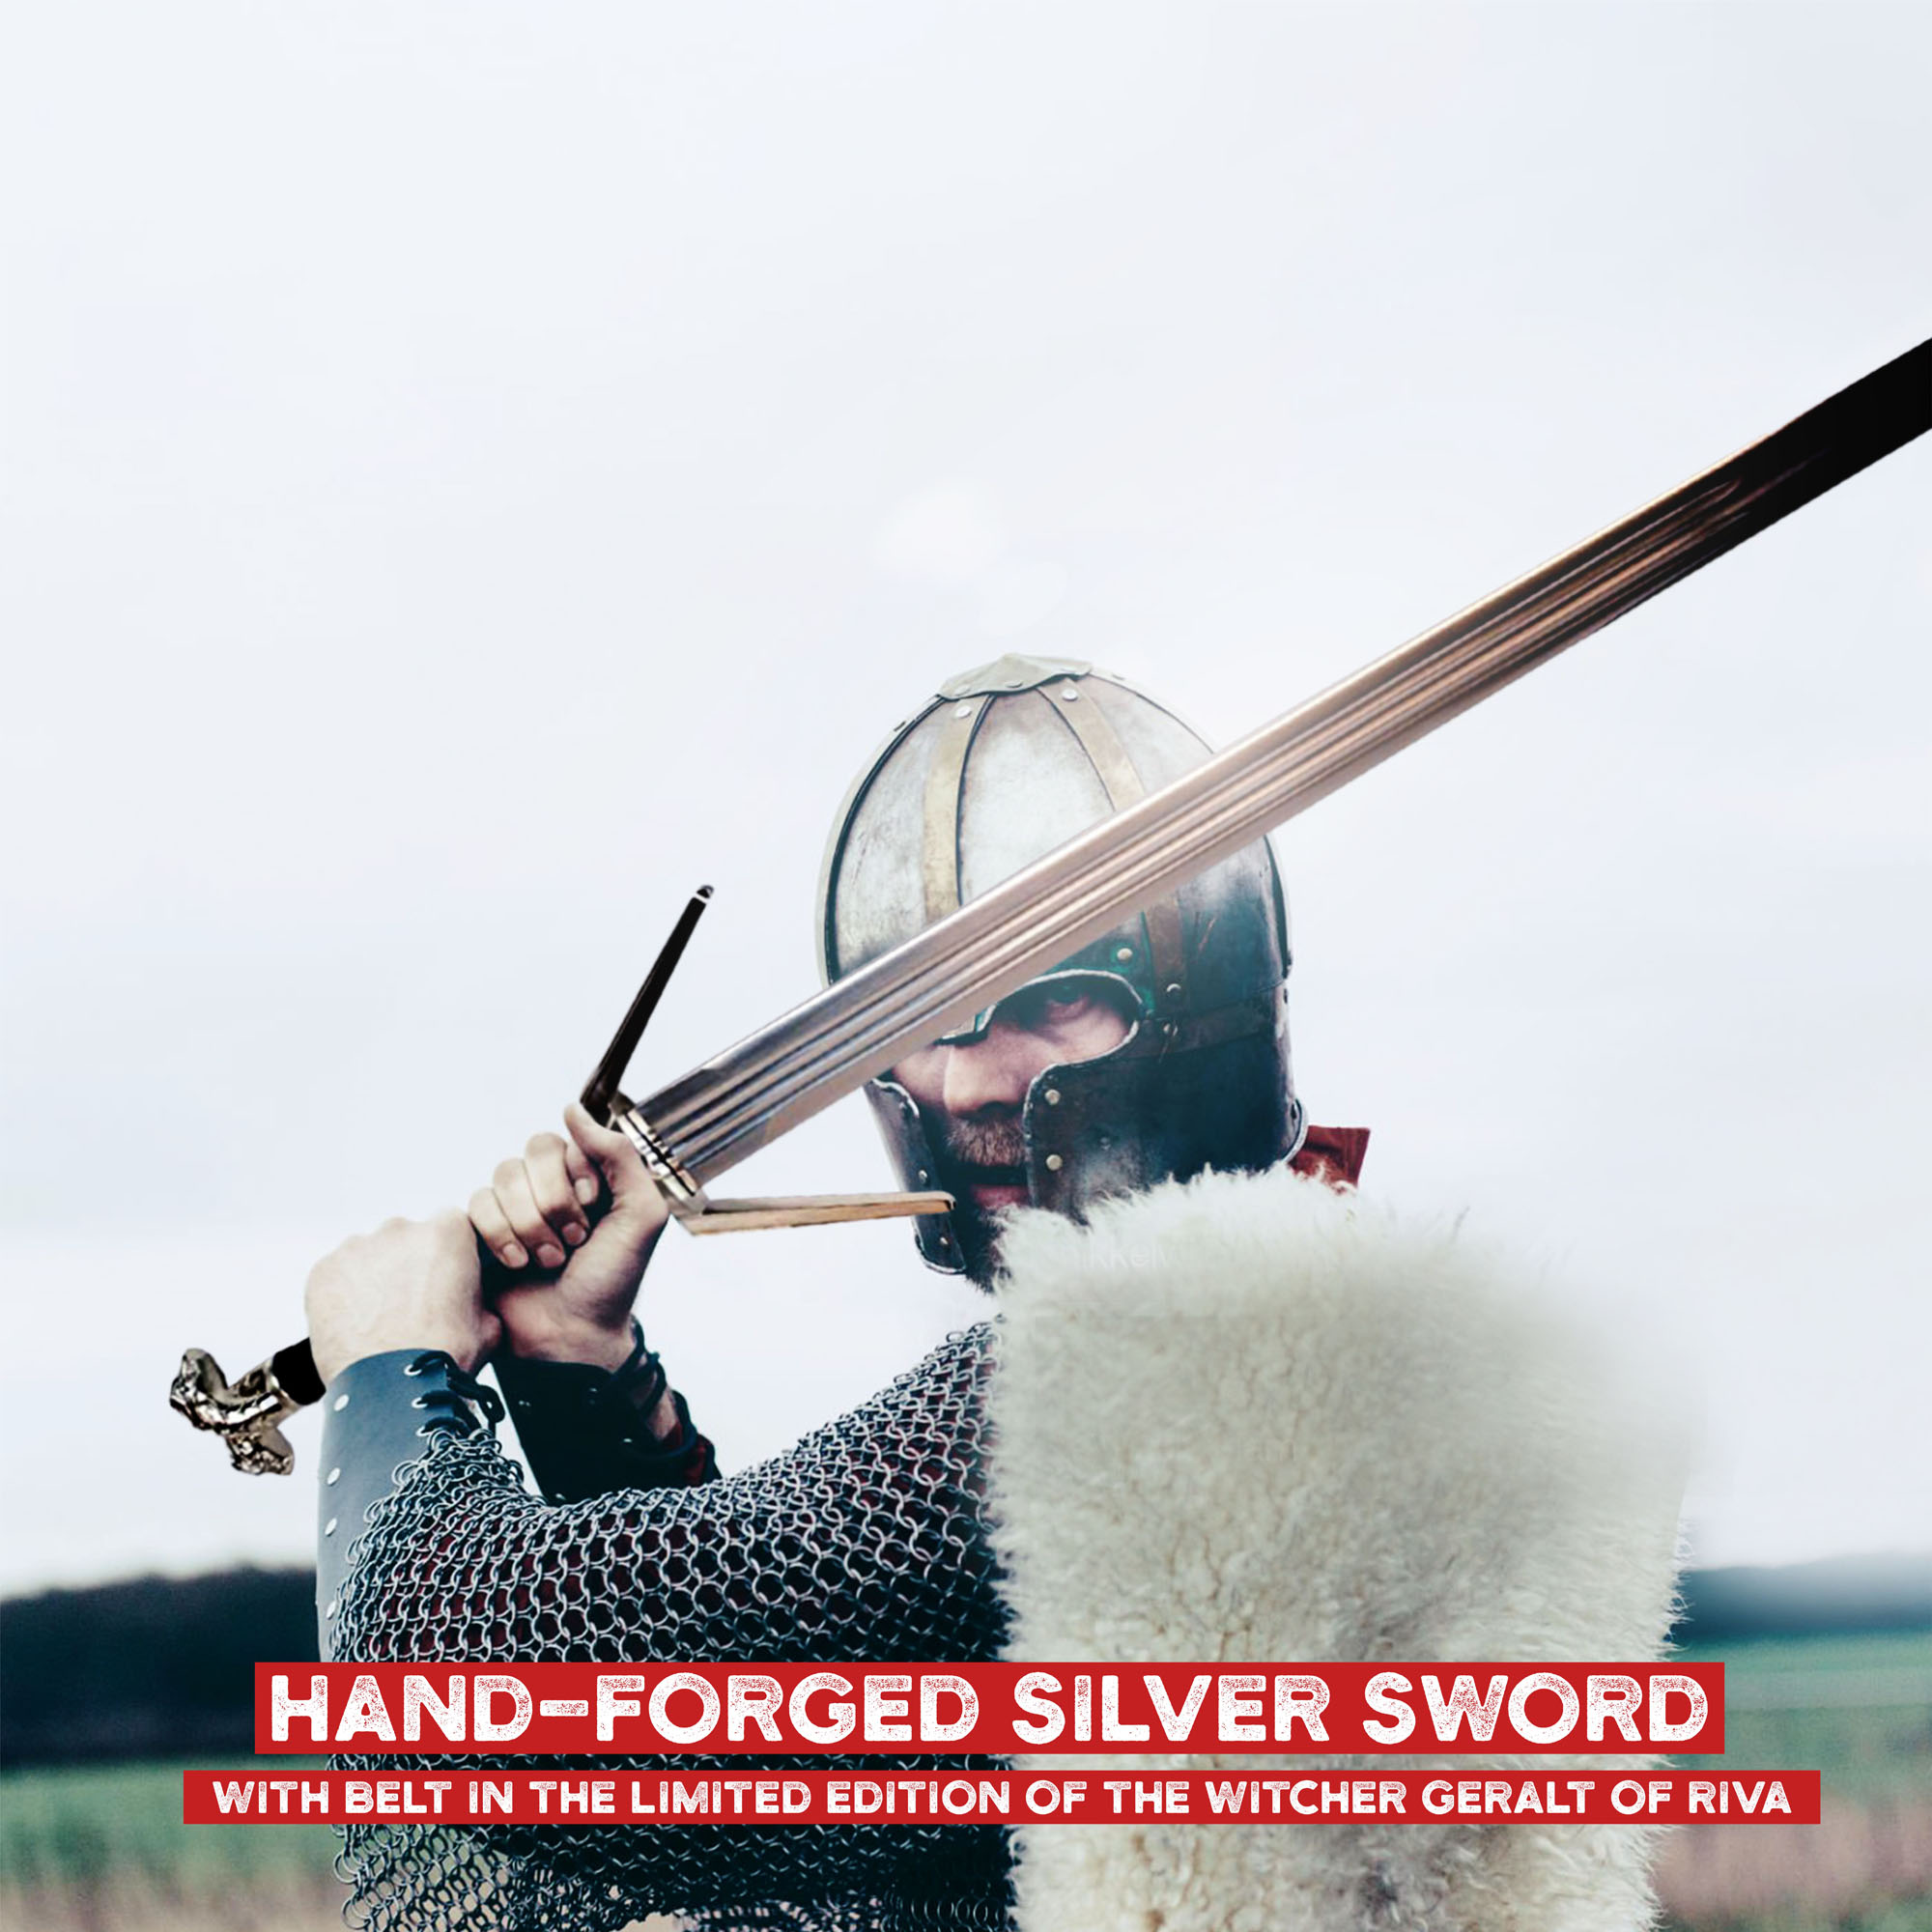 Witcher Silver Sword handforged with belt and scabbard - ltd Edition 500